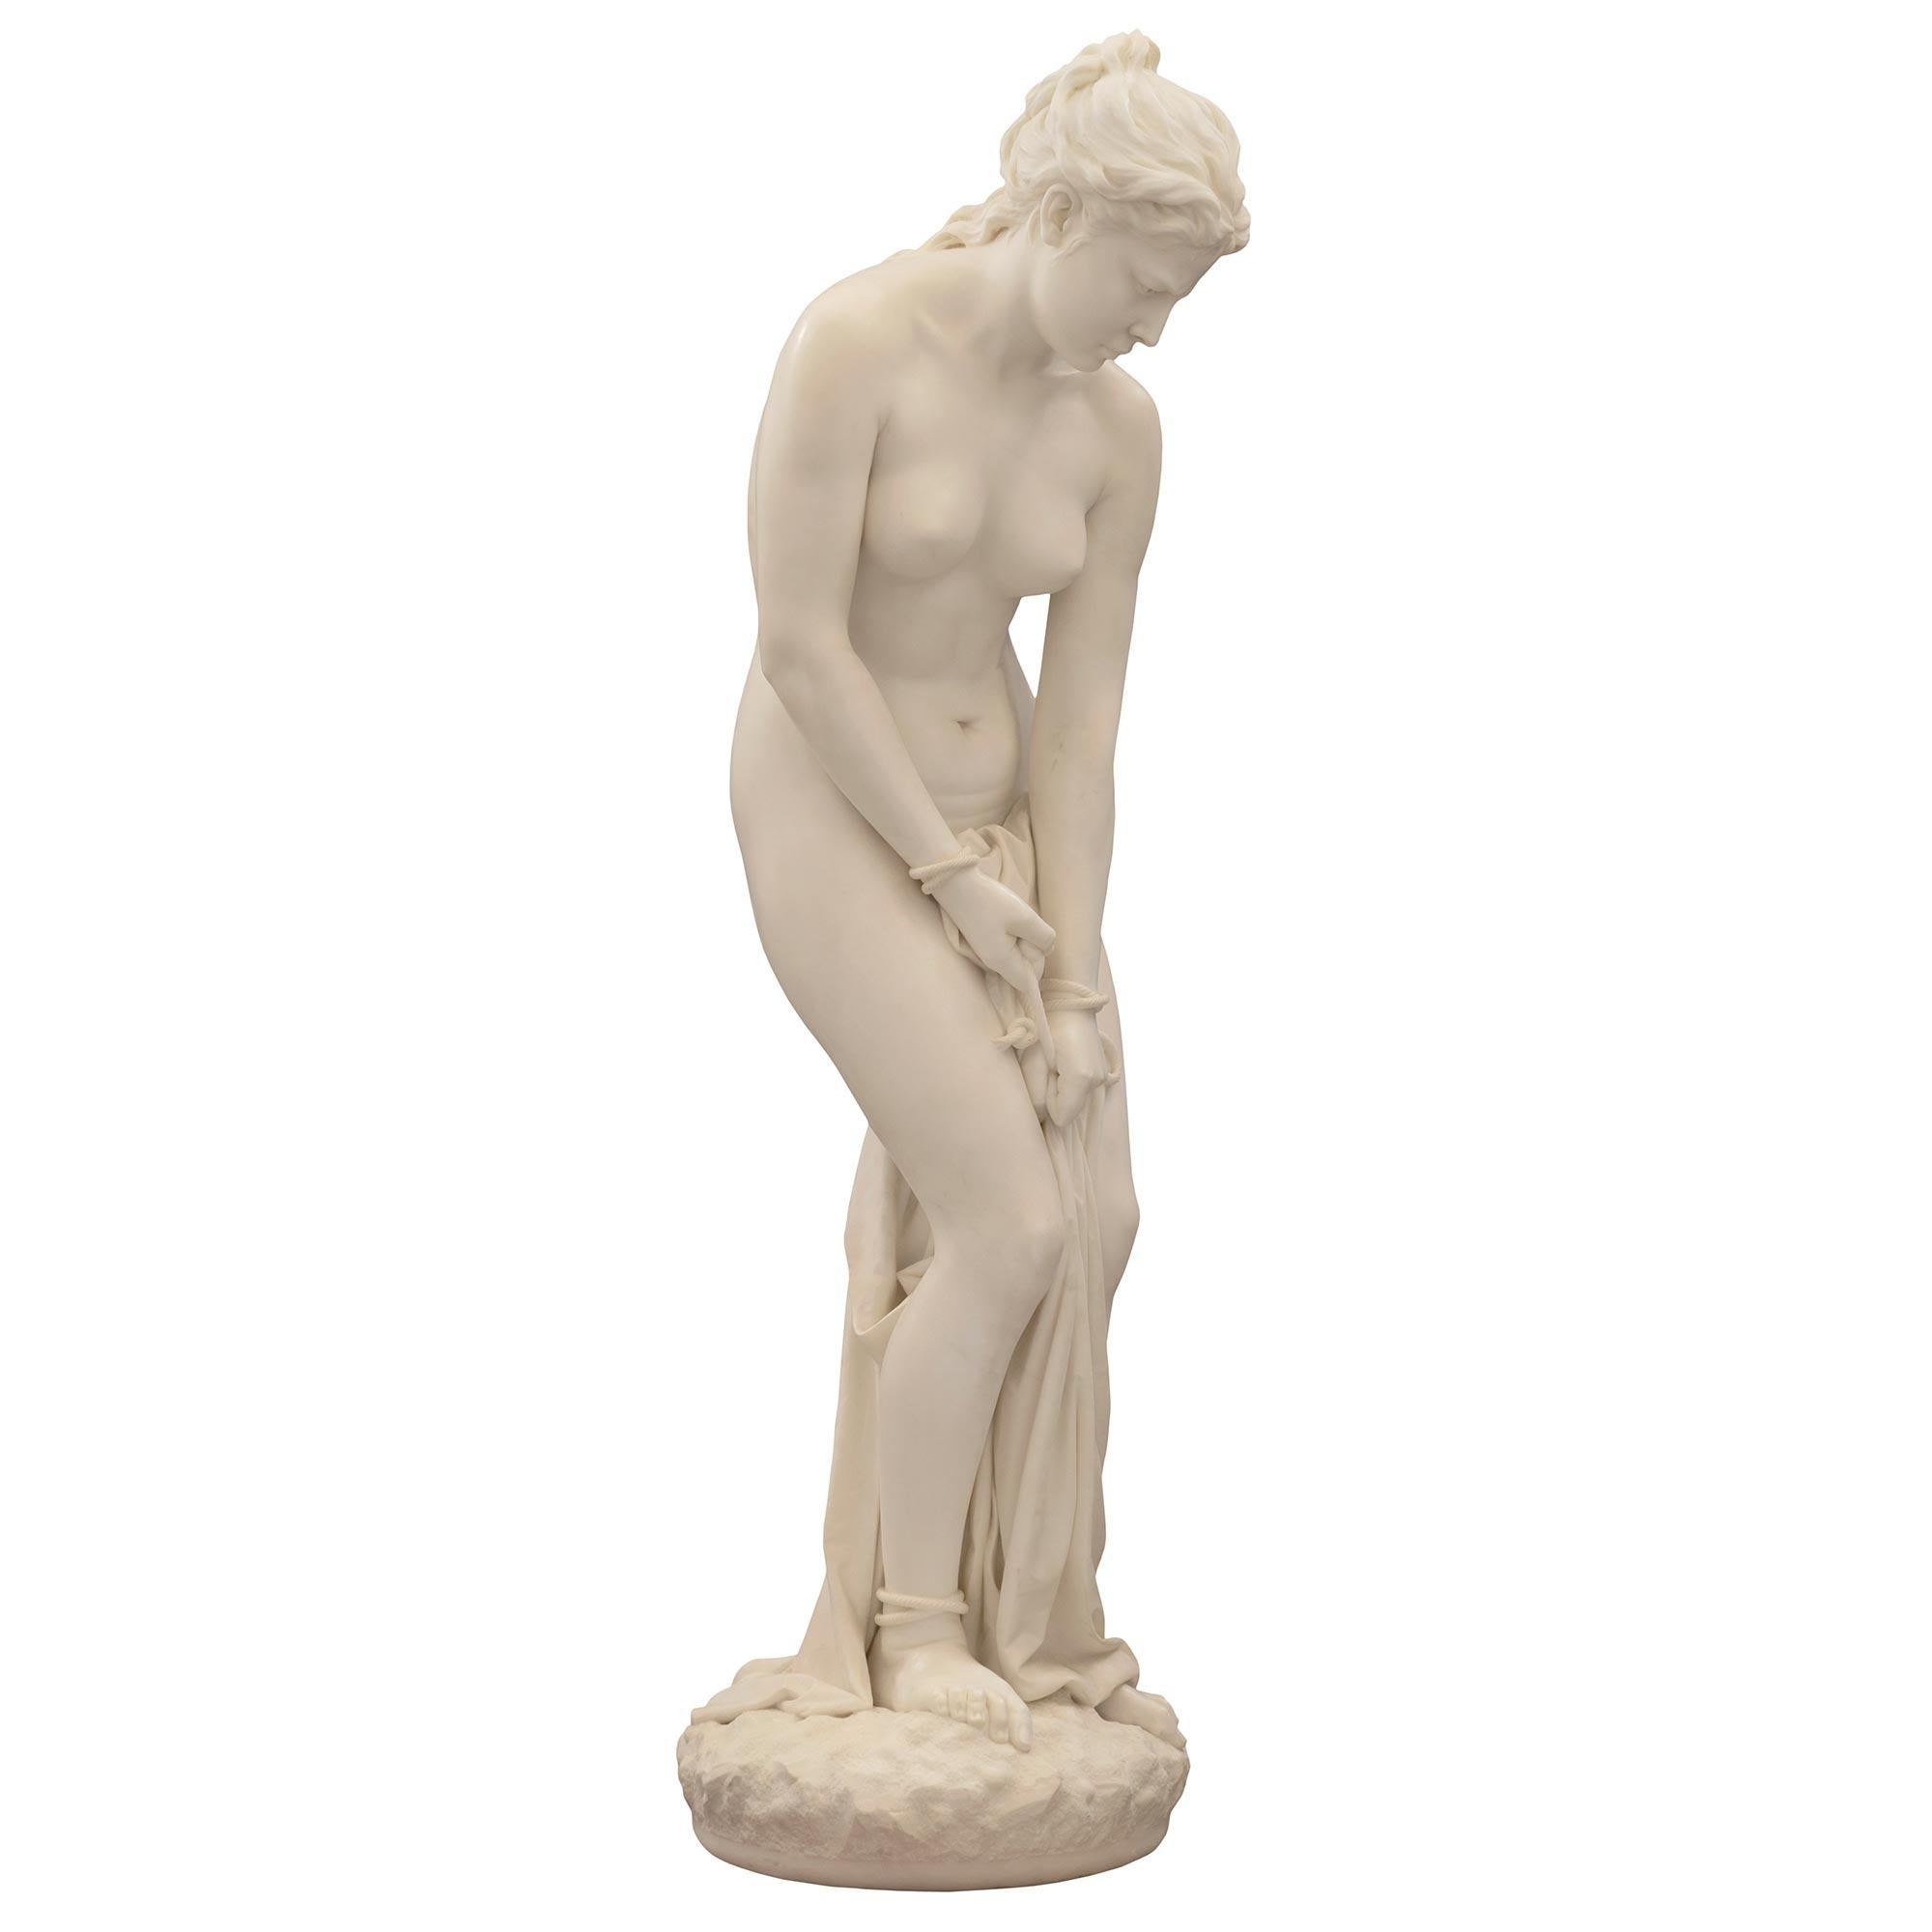 Italian 19th Century Solid White Carrara Marble Statue of a Bound Woman In Good Condition For Sale In West Palm Beach, FL